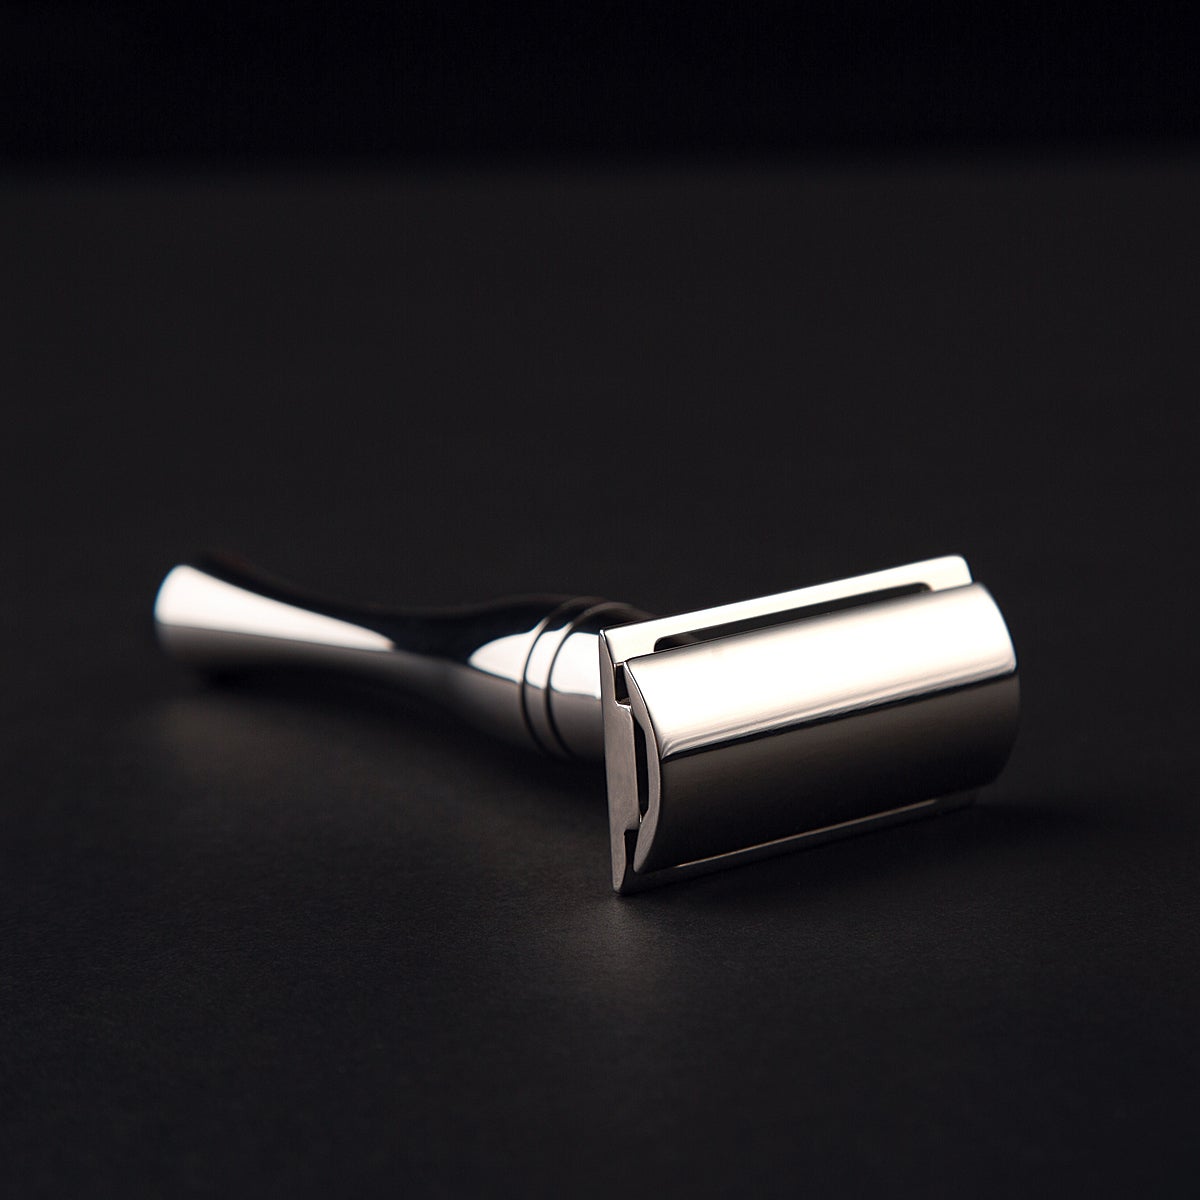 Wilde & Harte’s meticulously crafted razors bring a touch of luxury to your daily shave